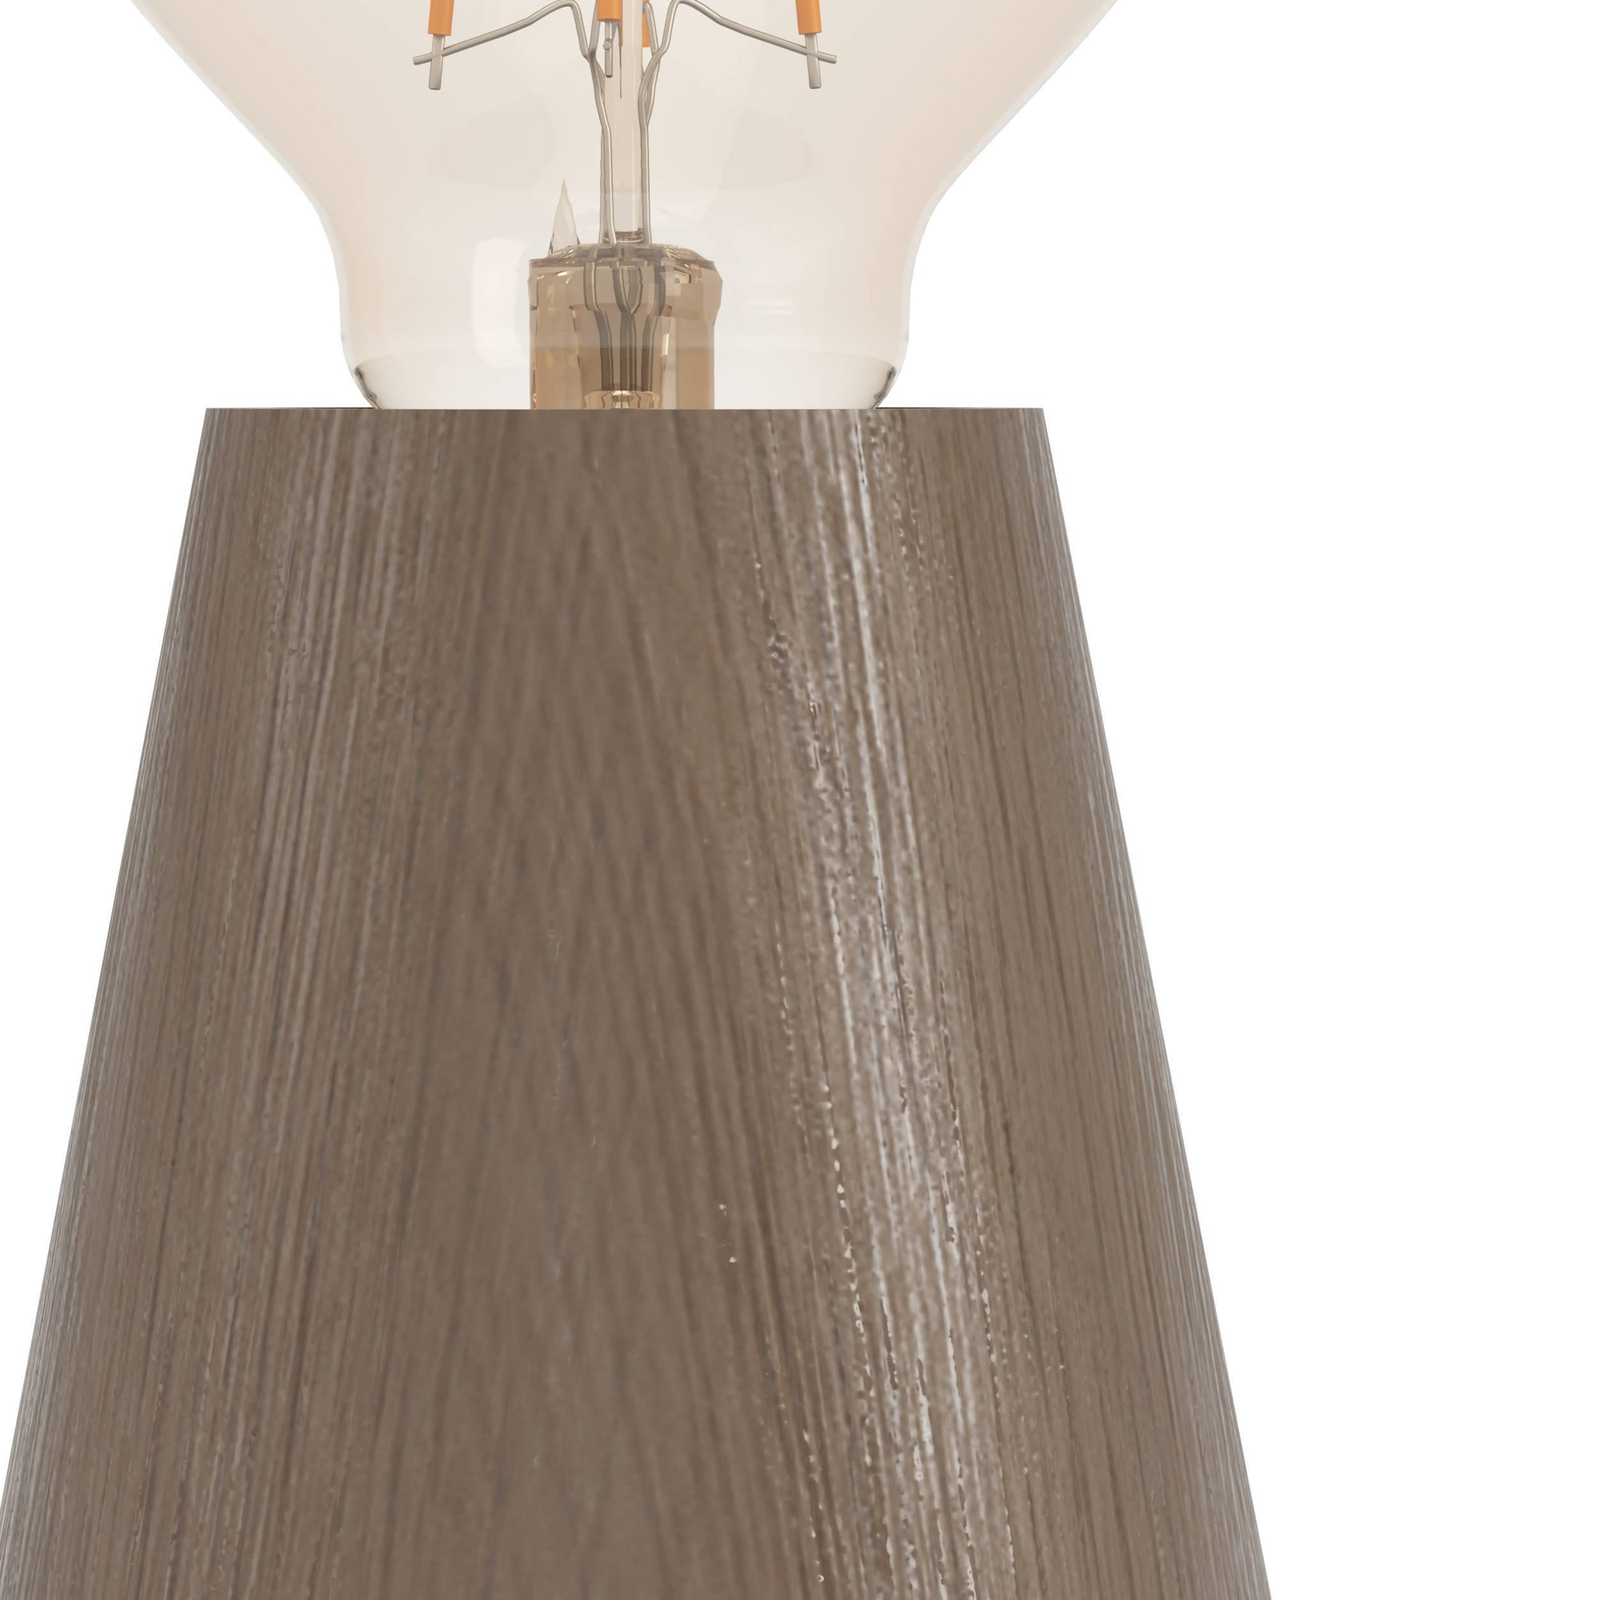 Asby table lamp, dark wood, height 10 cm, wood